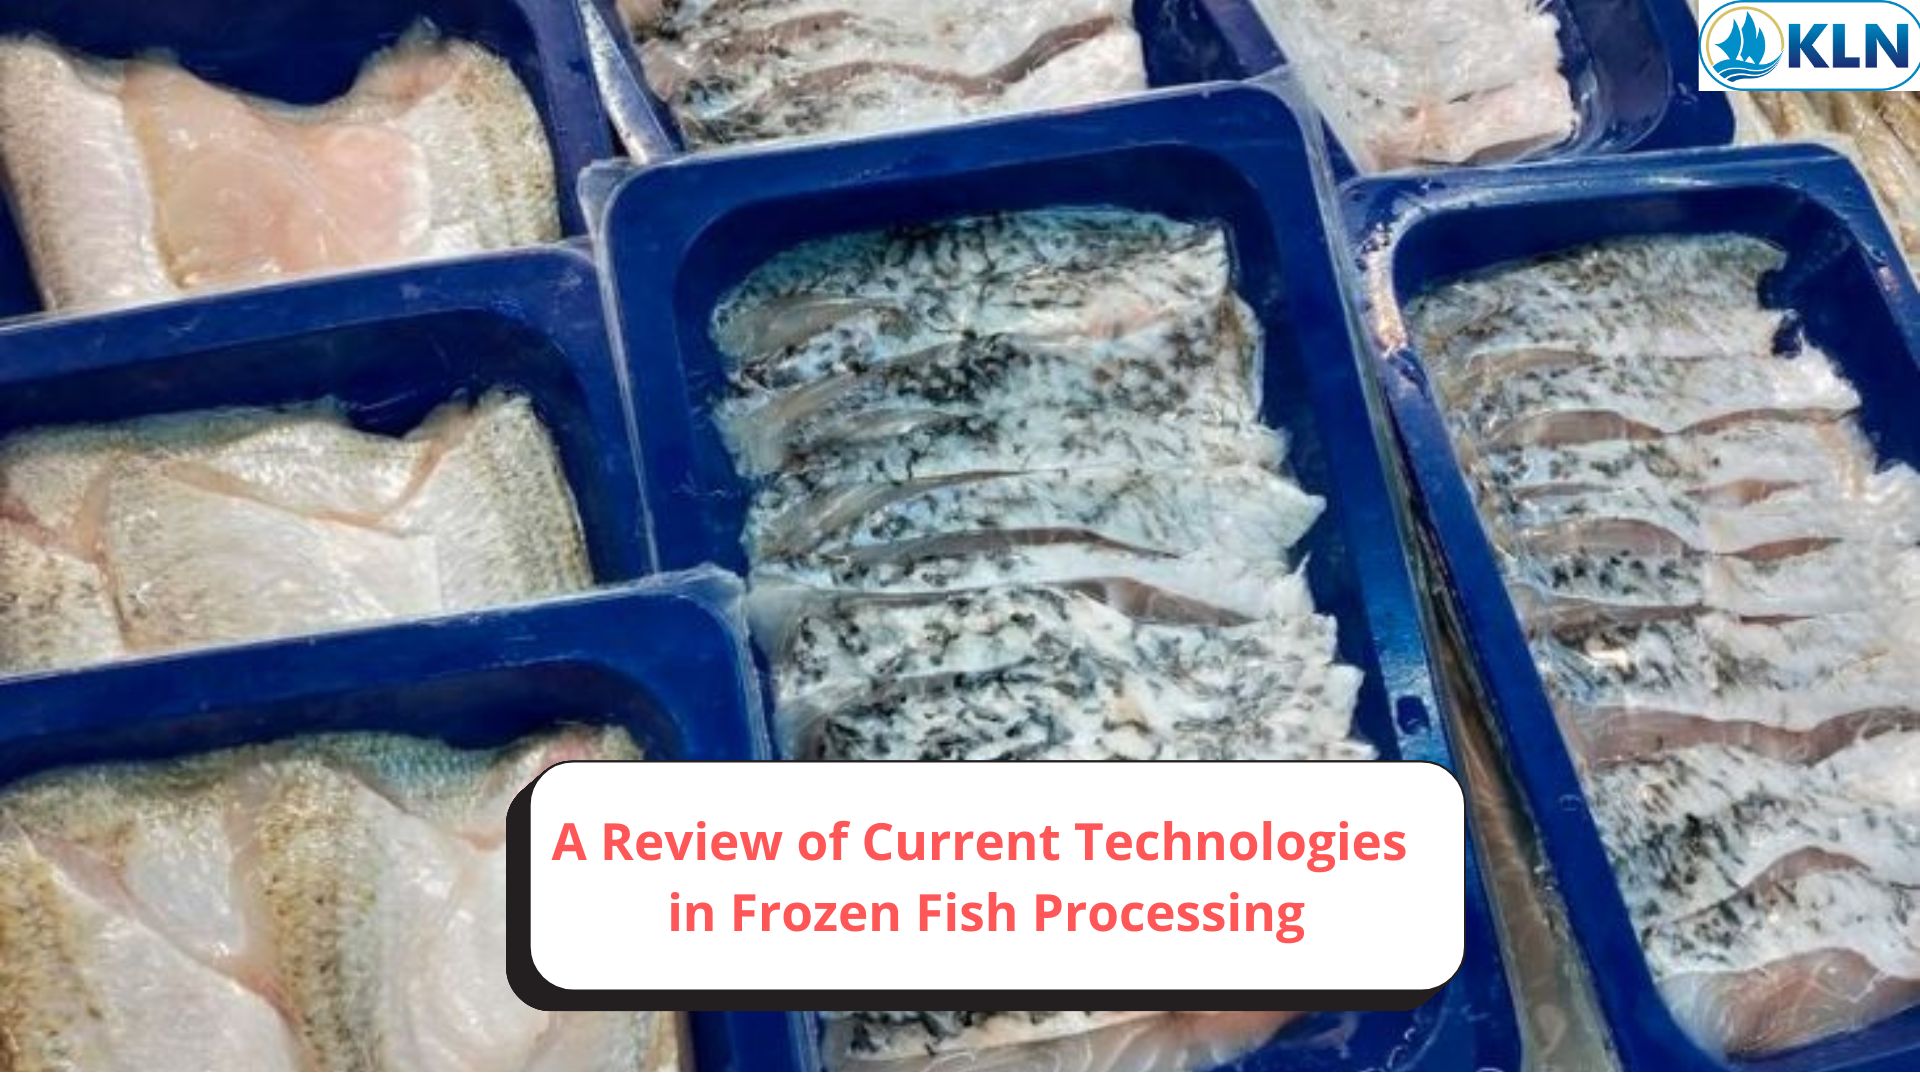 A Review of Current Technologies in Frozen Fish Processing